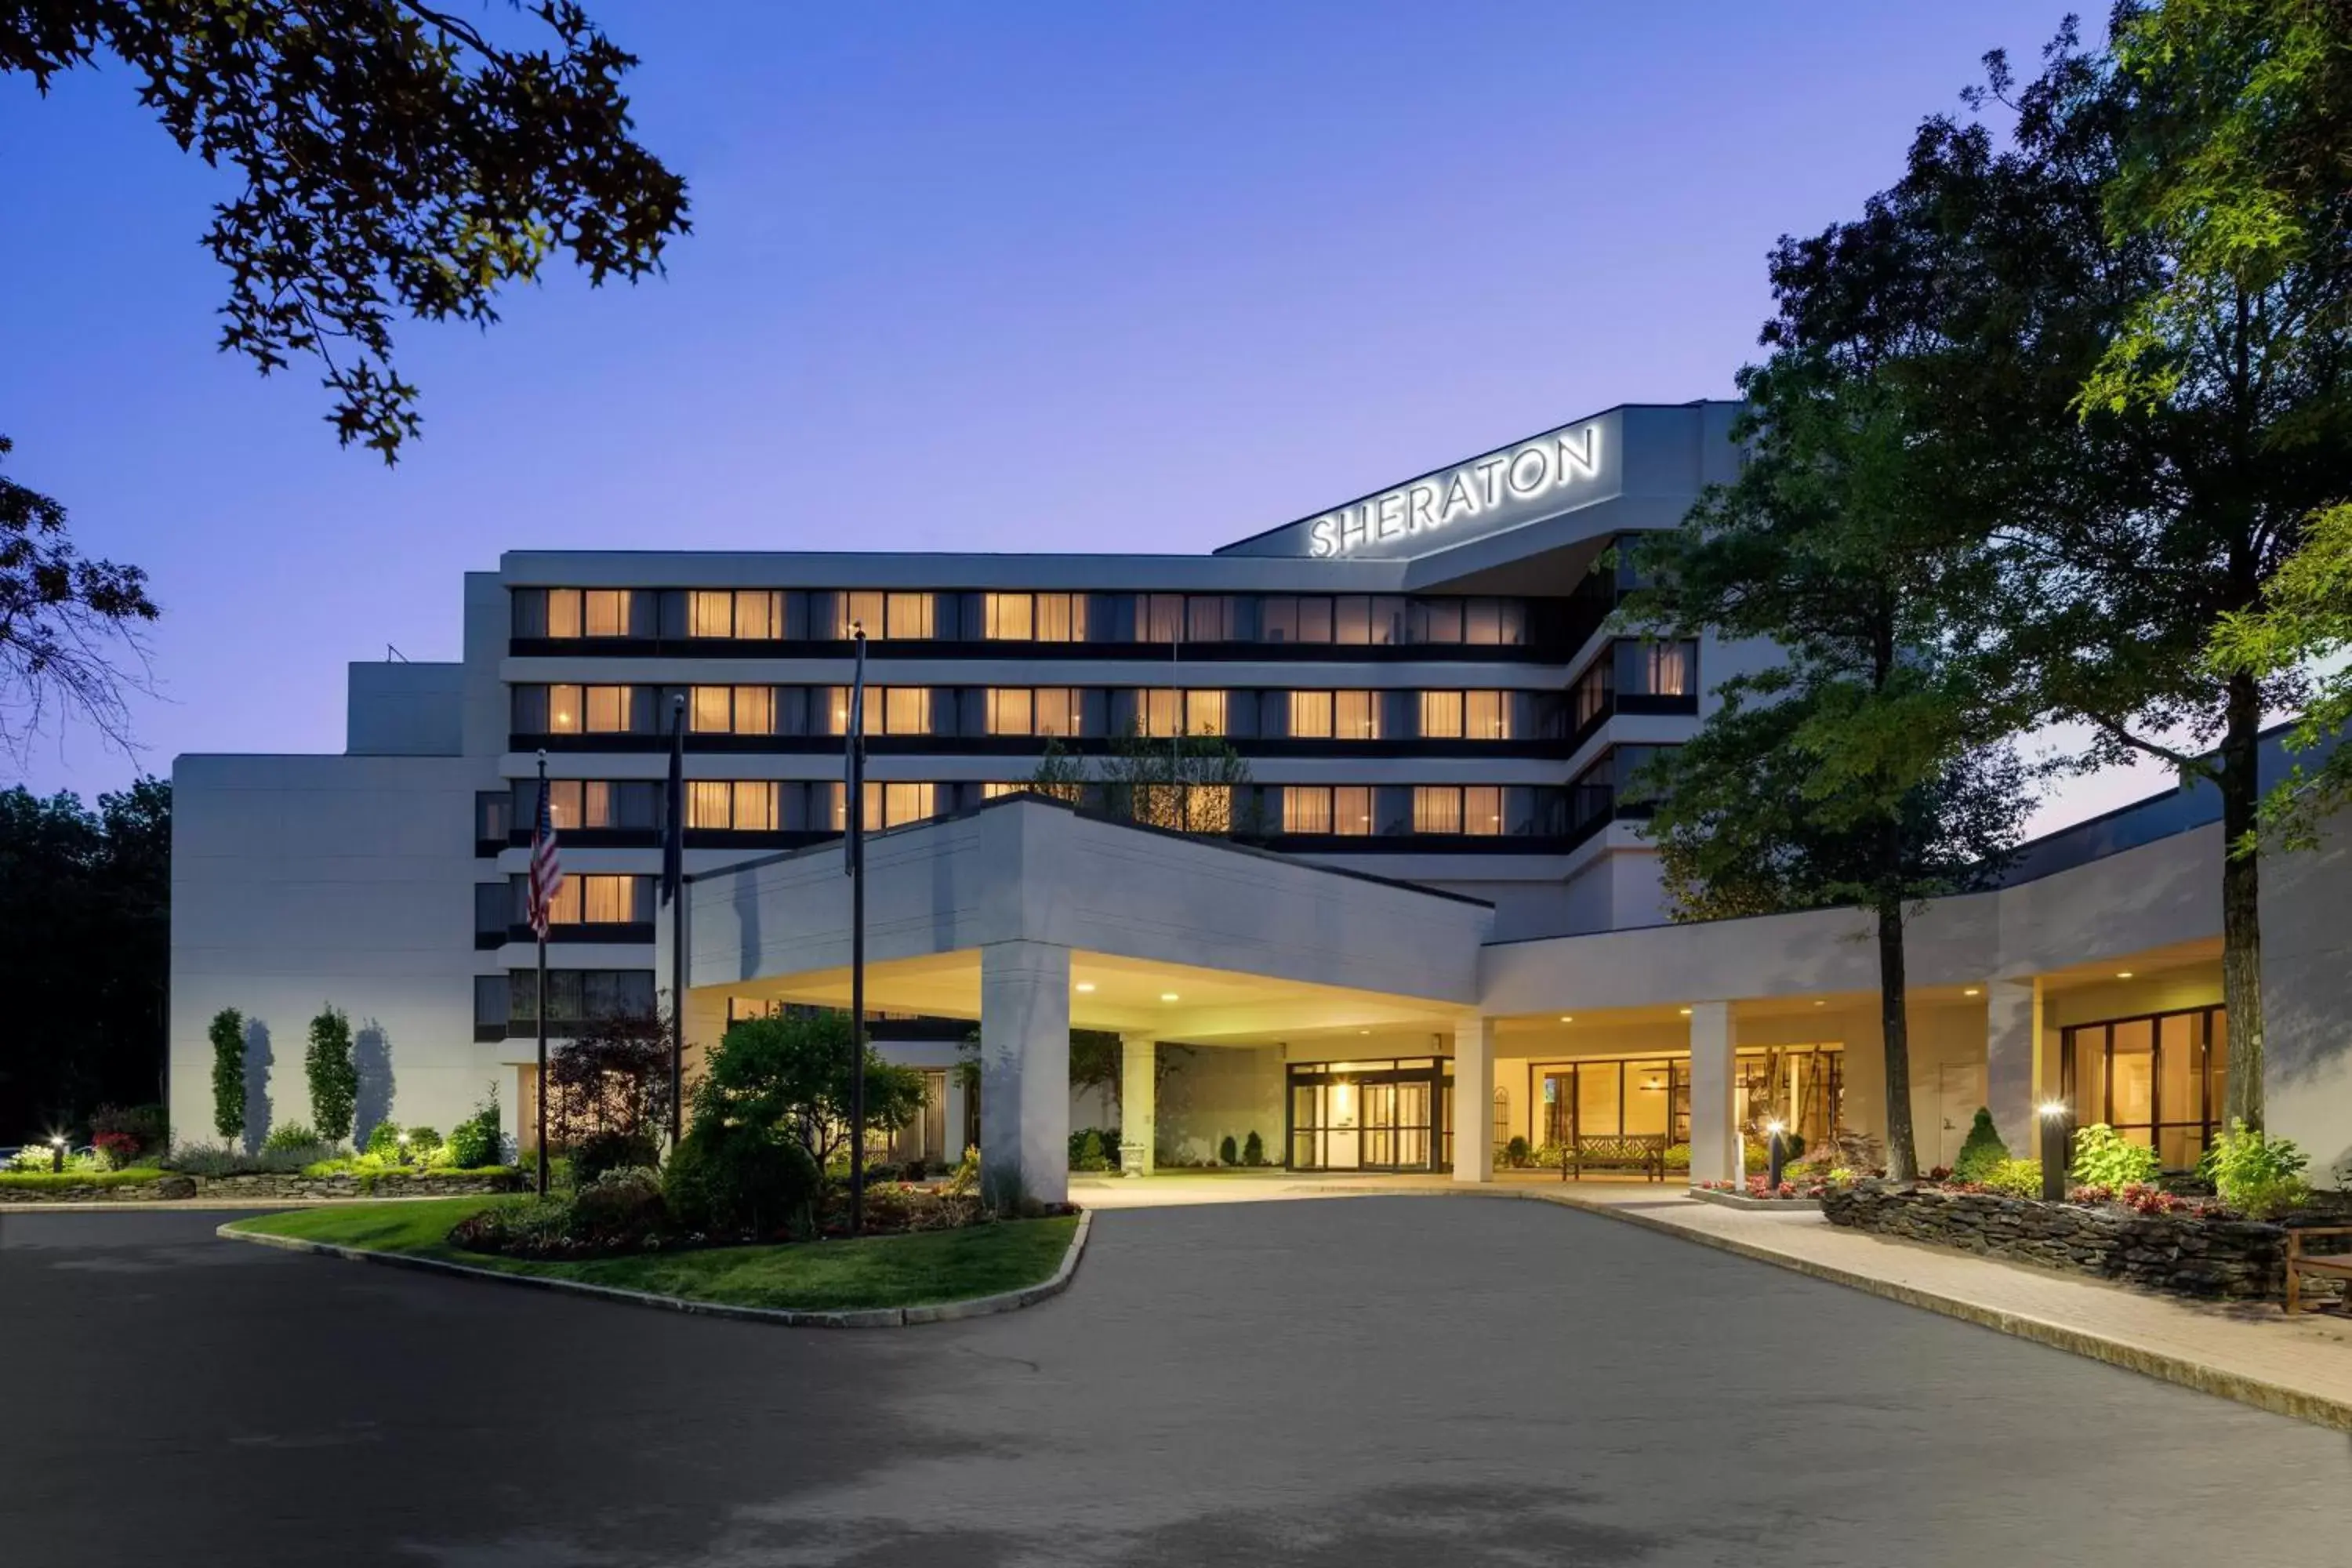 Property Building in Portland Sheraton at Sable Oaks